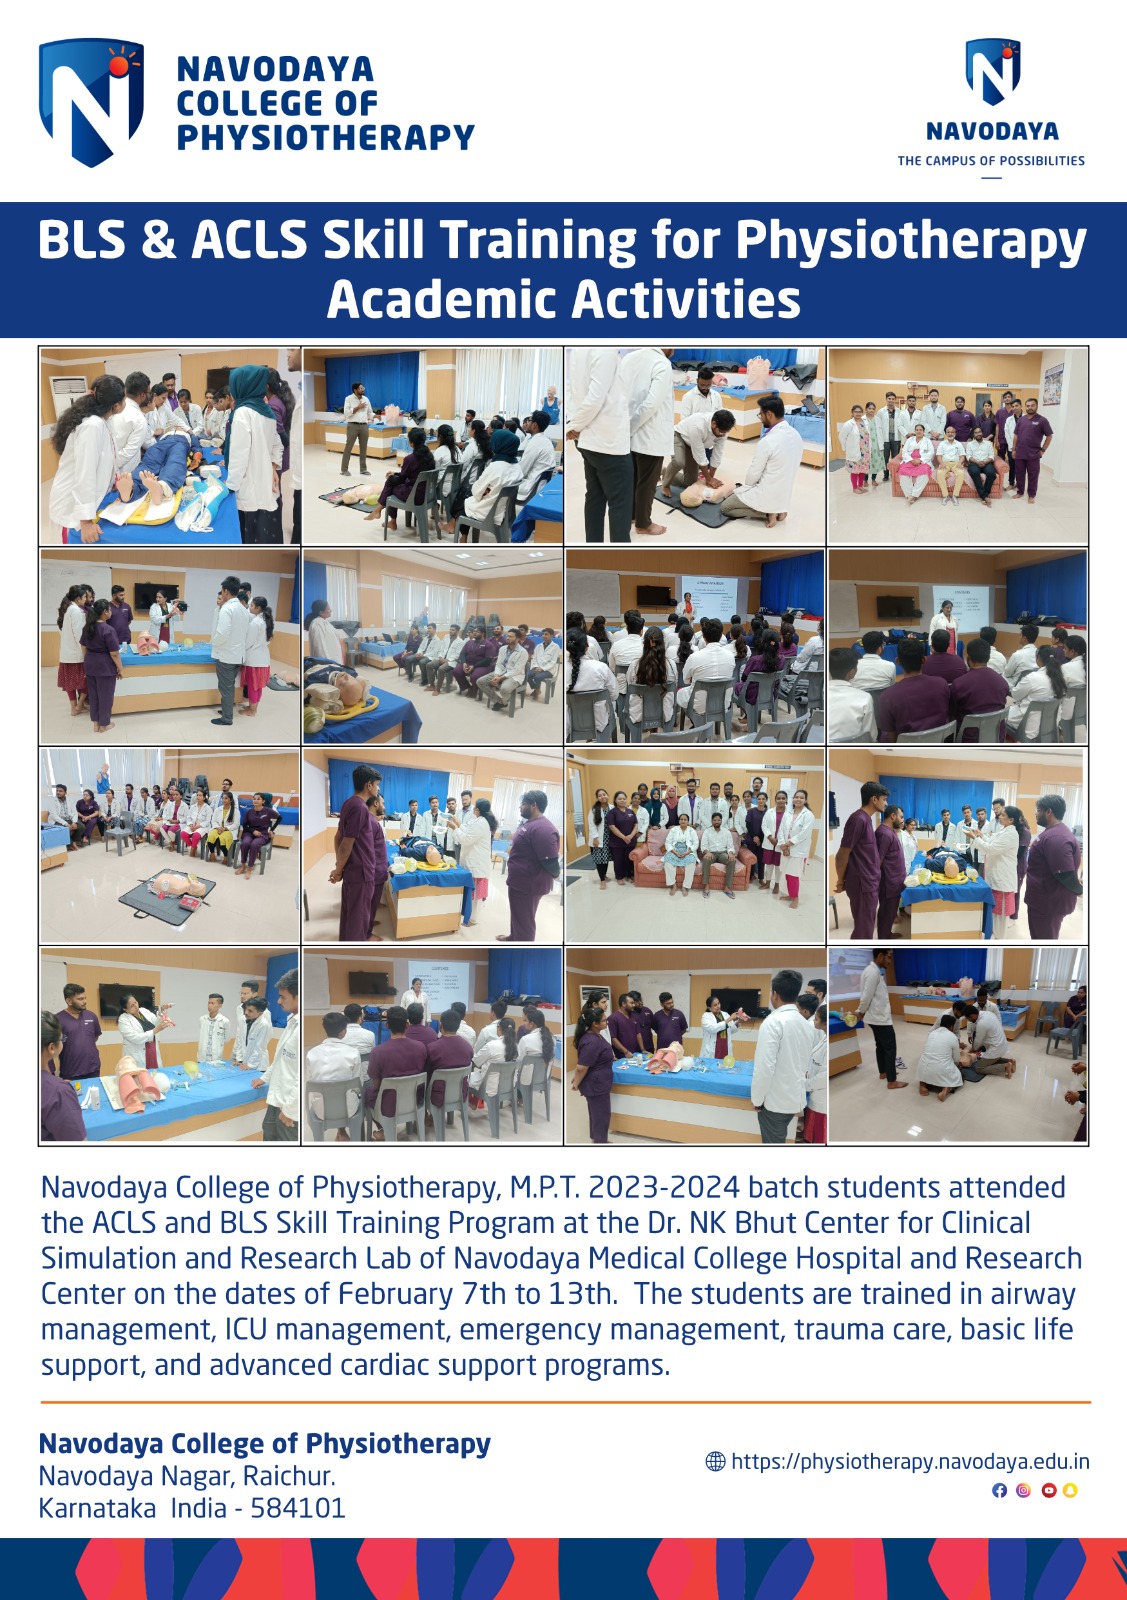 First Aid & BLS ACLS Skill Training for Physiotherapy Academics Activities